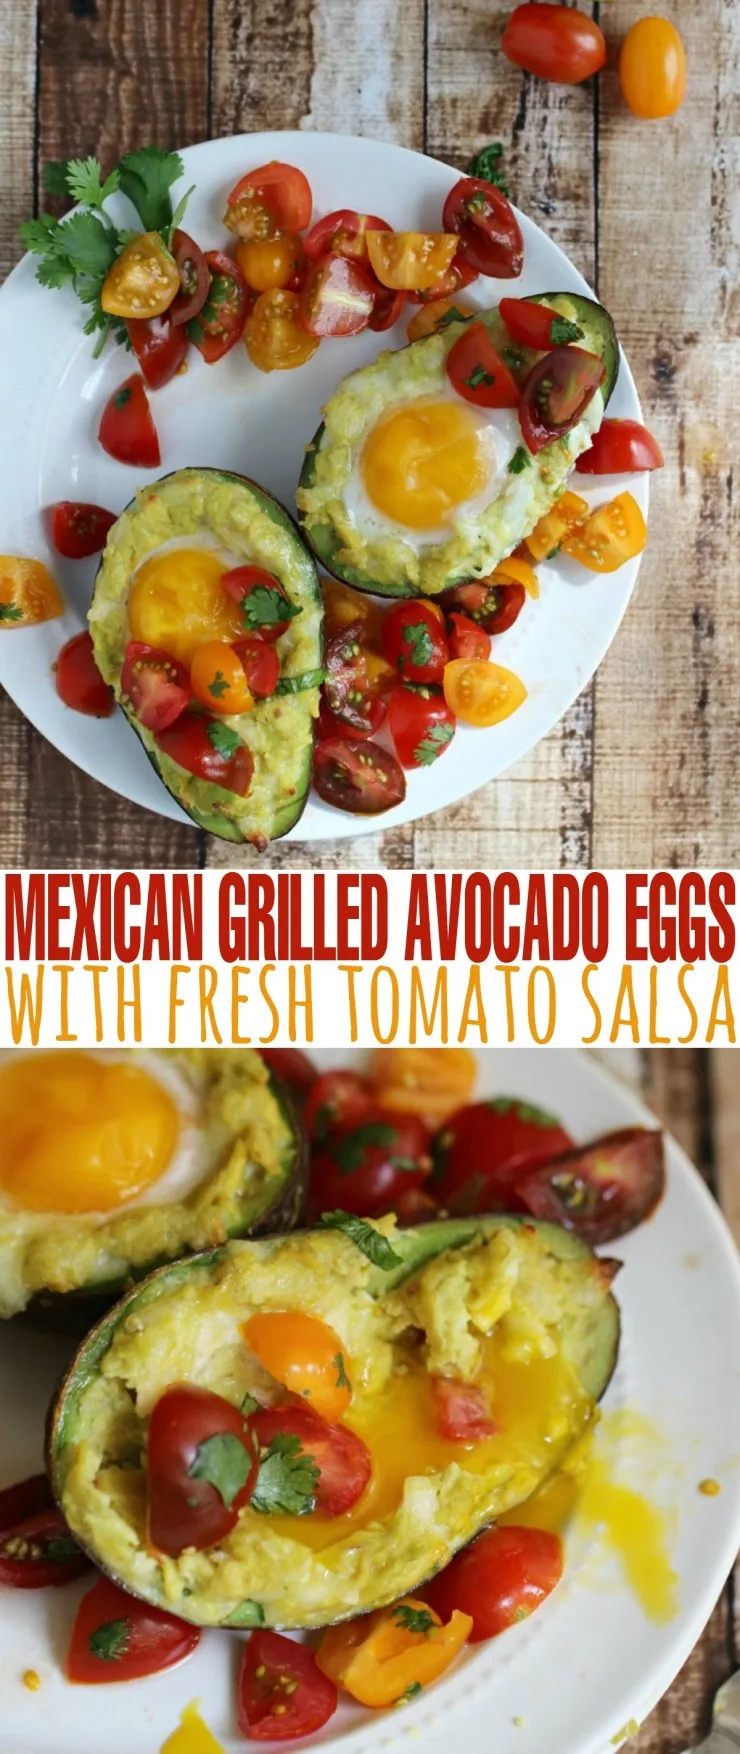 This recipe for Mexican Grilled Avocado Eggs with Fresh Tomato Salsa is the perfect summer meal!  They are great for Breakfast, Brunch, and lunch!